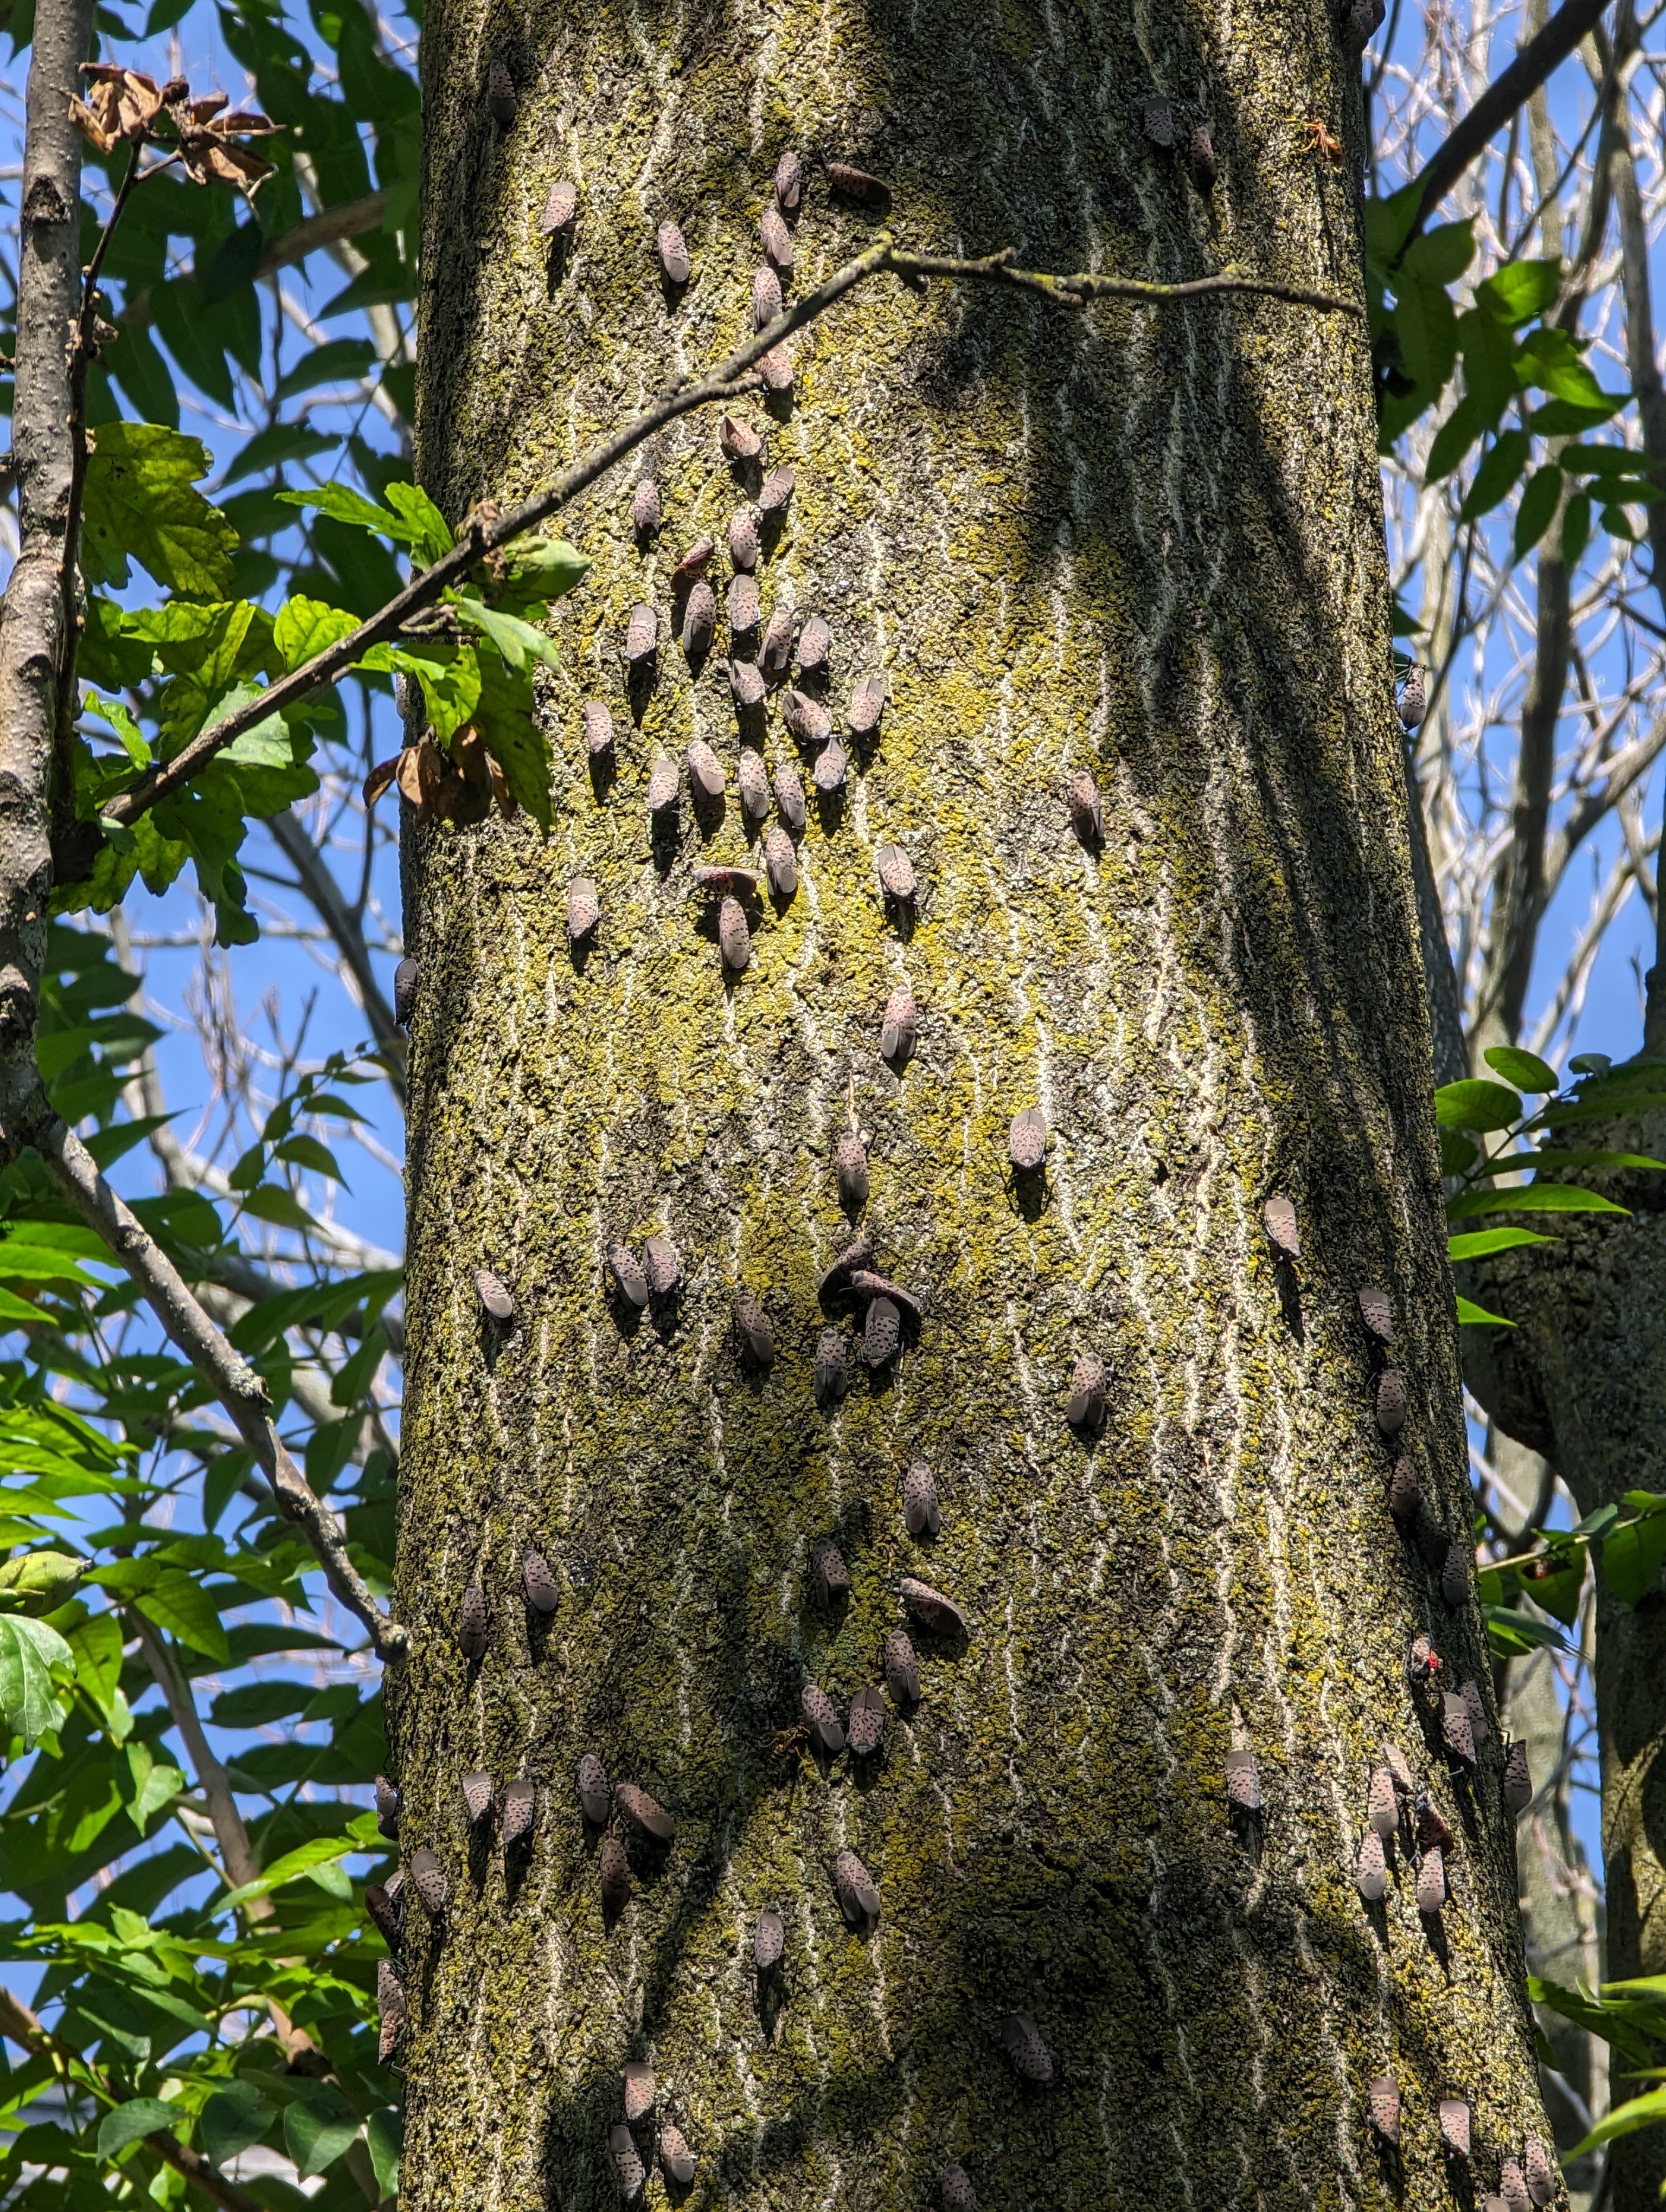 Tree of heaven in Ohio with many adult spotted lanternflies.